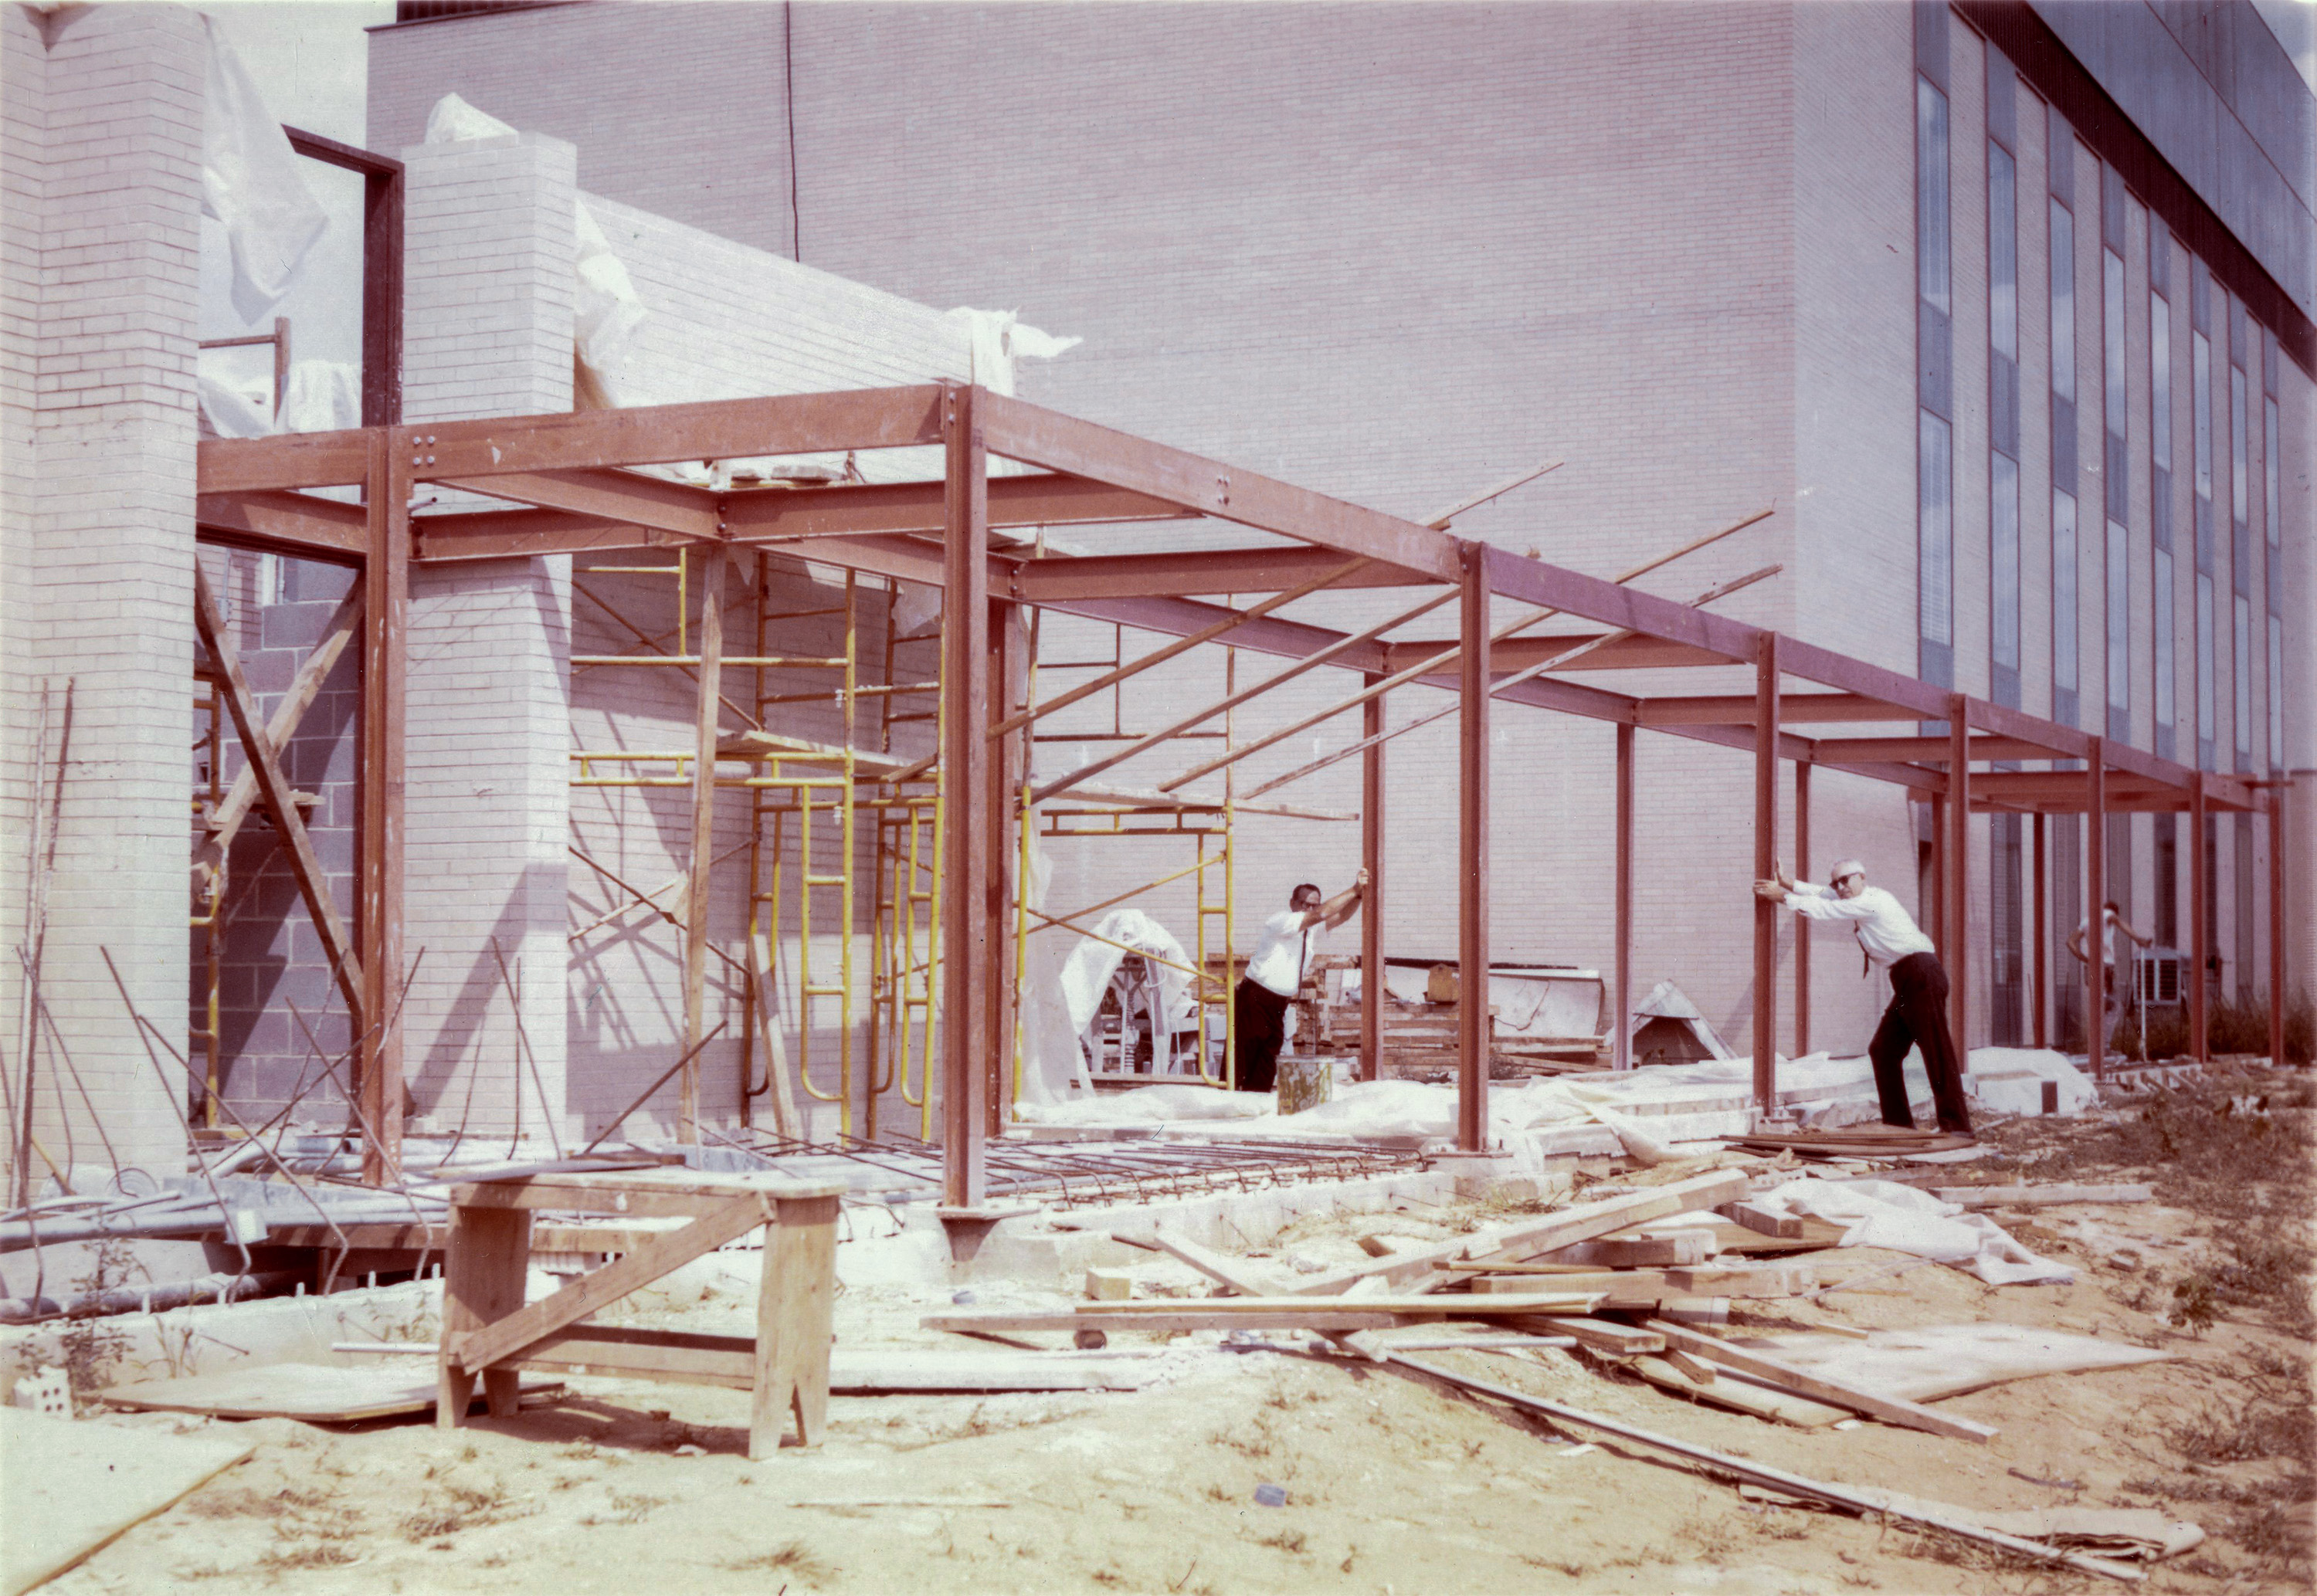 A photo showing the construction of the “breezeway” in the 1960s. Two NIST "wise guys" clown for the camera by acting as though they're keeping the structure from collapsing.